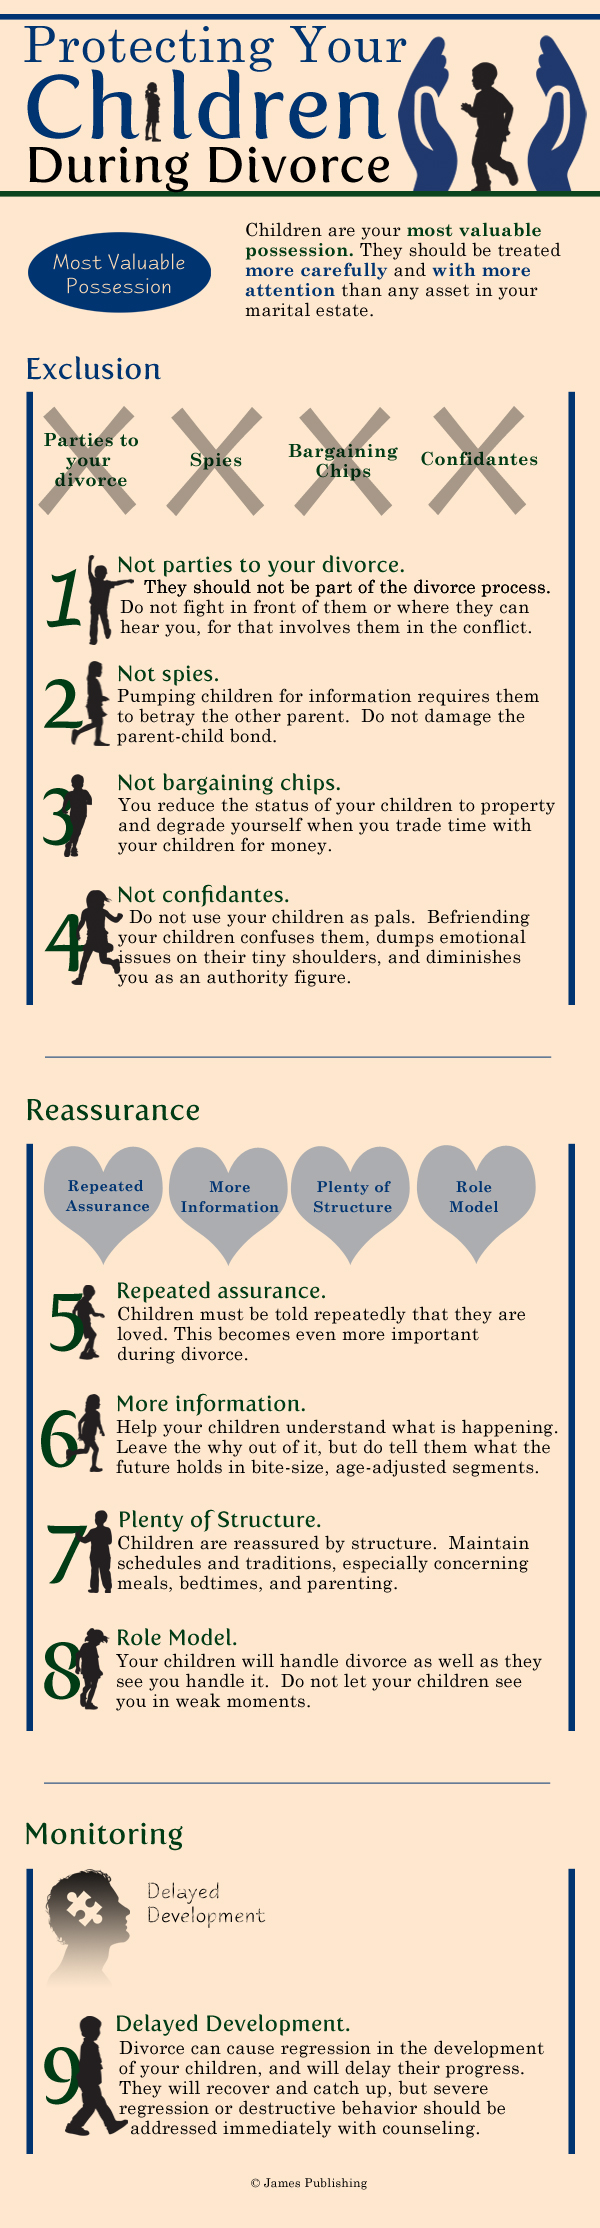 Austin Divorce Lawyers - Protecting Your Child Infographic